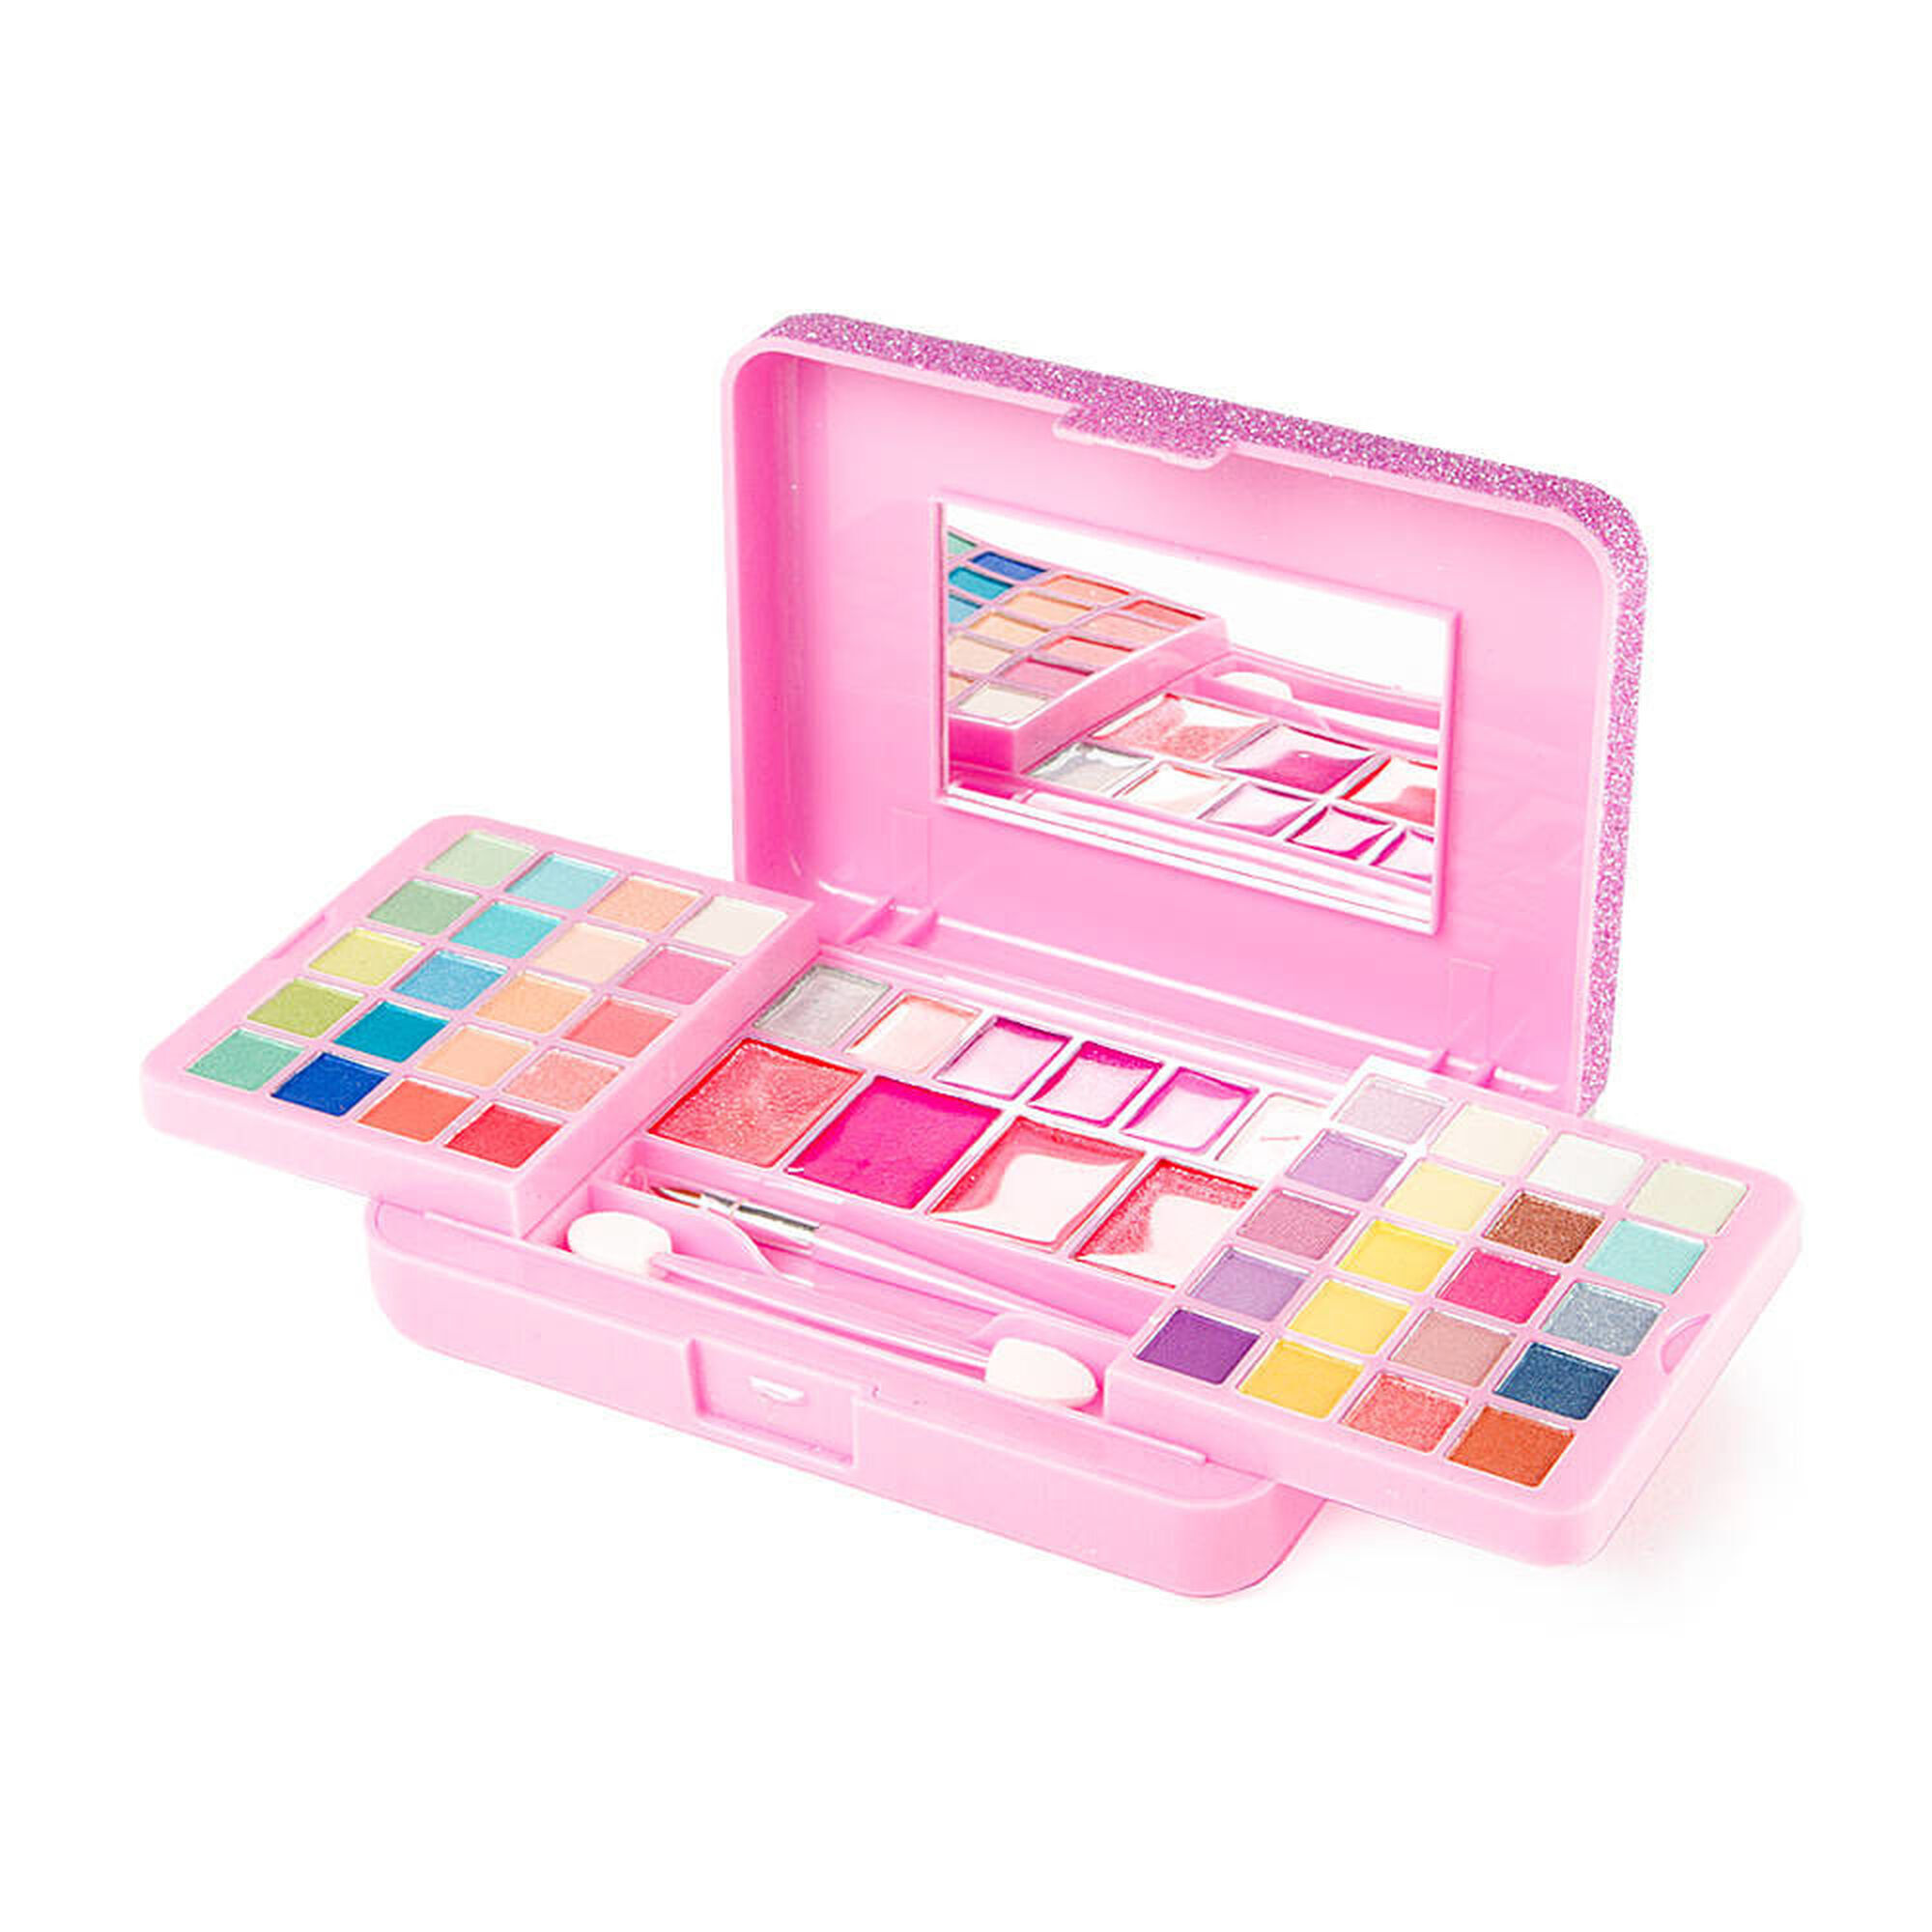 Temerity Banke Fundament Pink Glitter Makeup Set | Claire's US